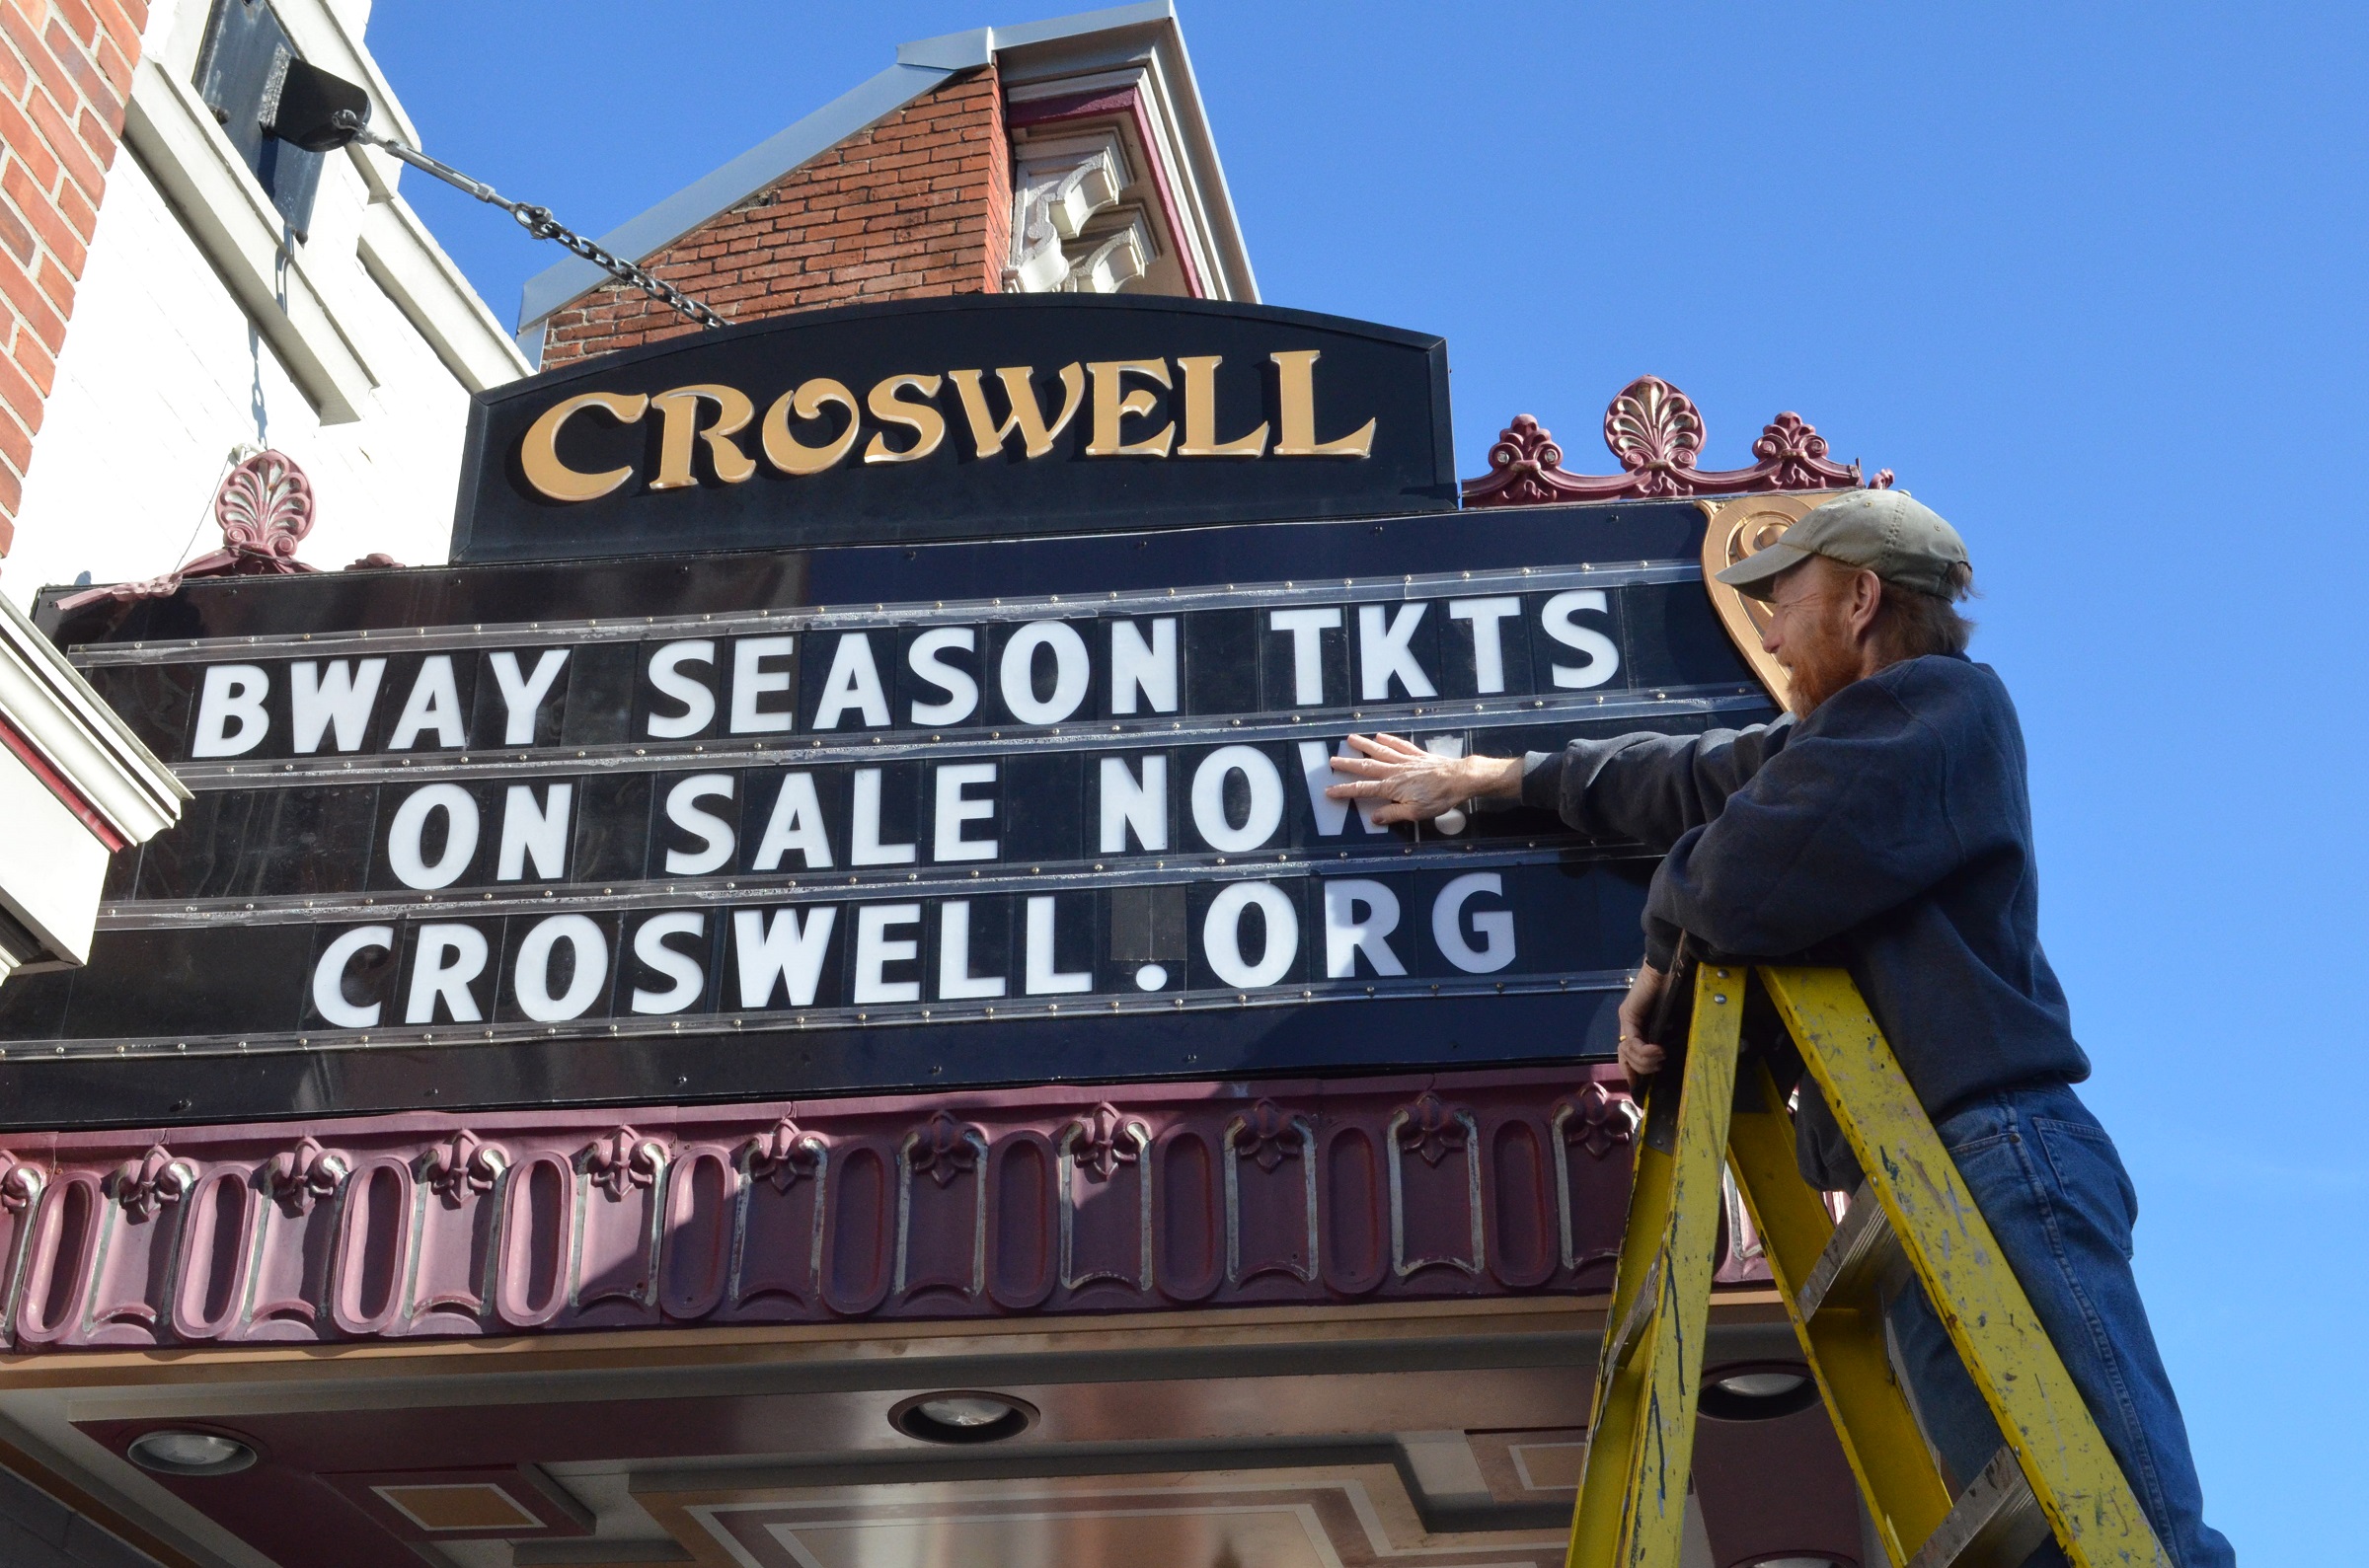 Tickets for Croswell’s 2016 Broadway Season now on sale